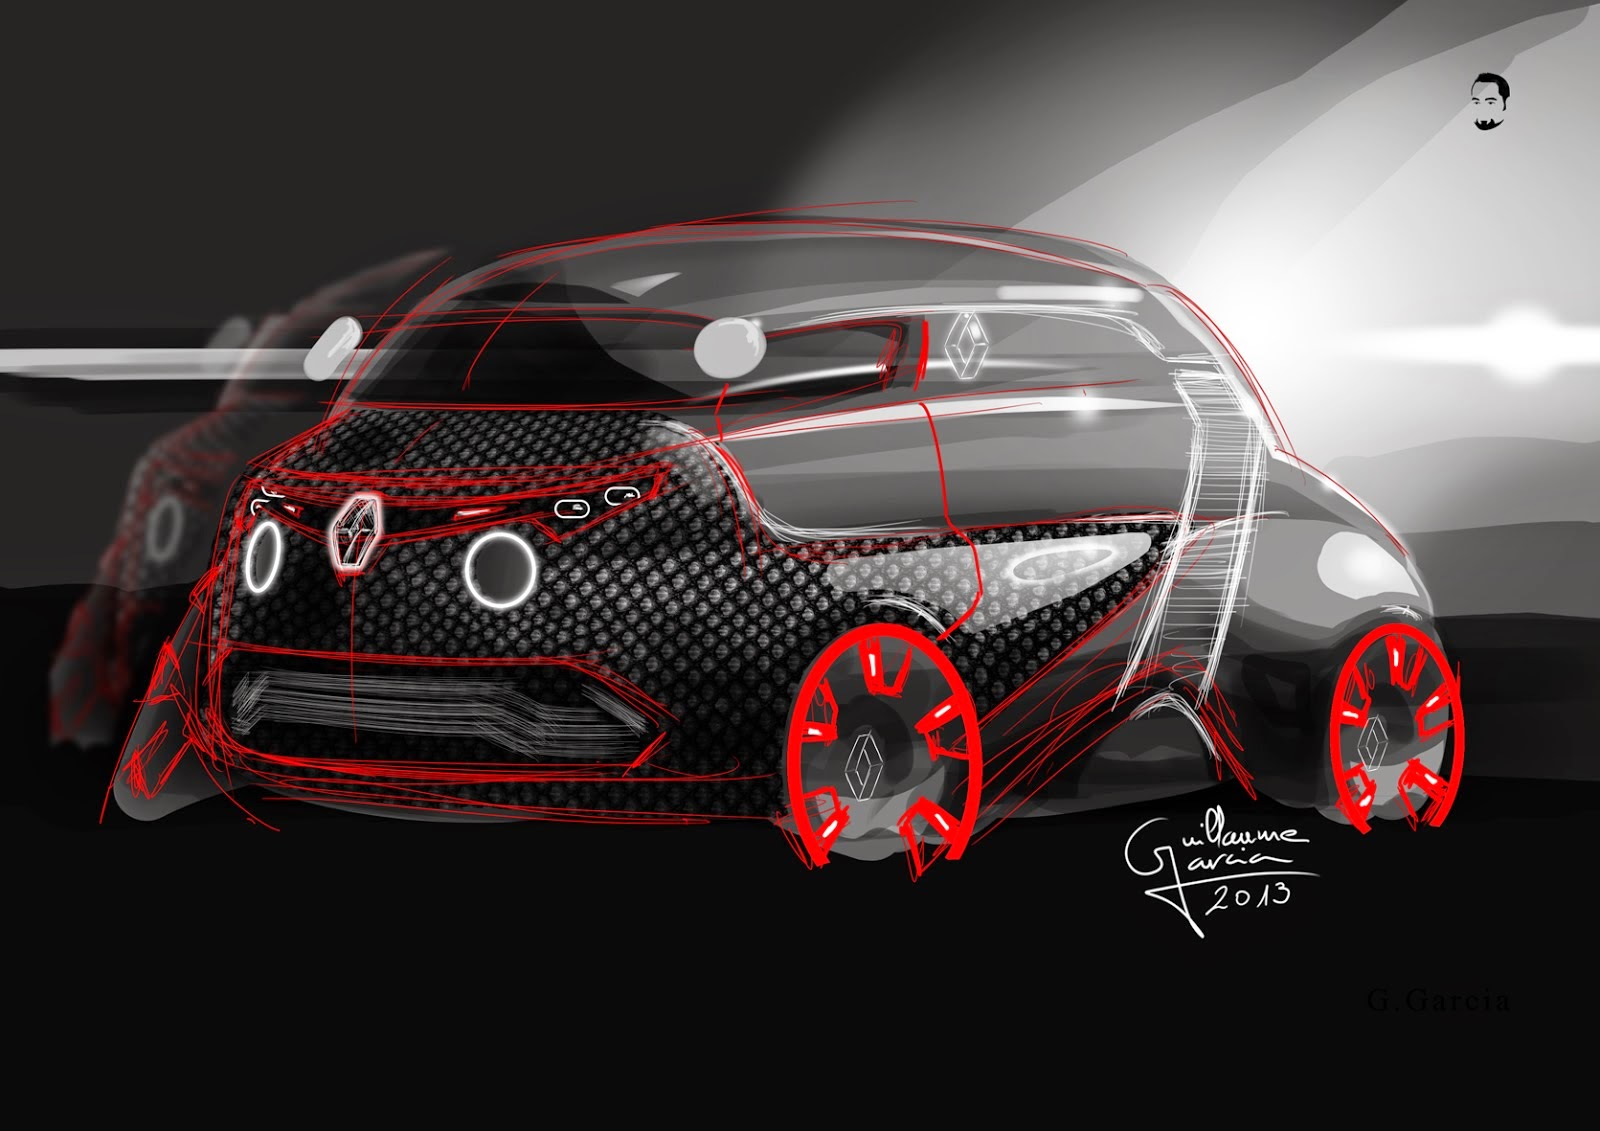 RENAULT S-TAFF first sketch research